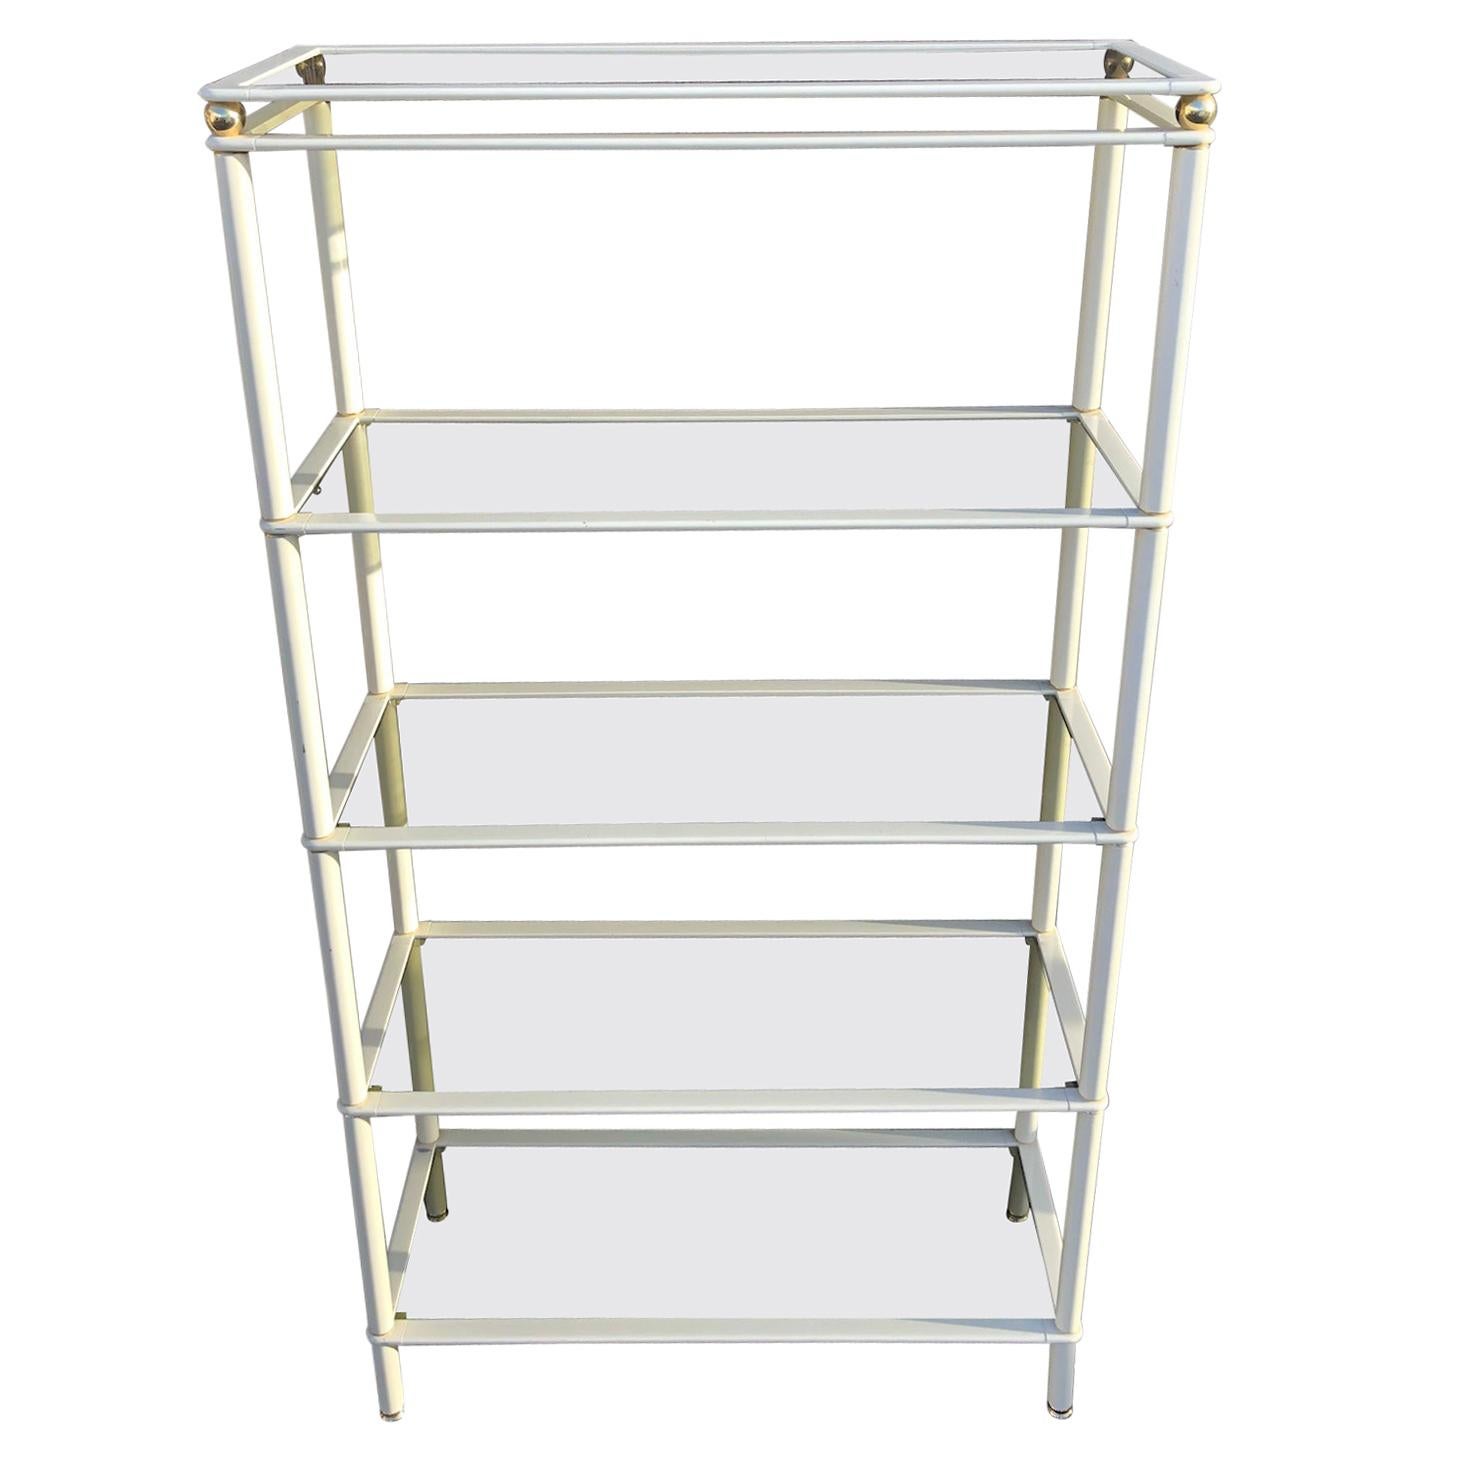 Midcentury Cream and Gold Metal Shelving Units, Italian, 1980s For Sale